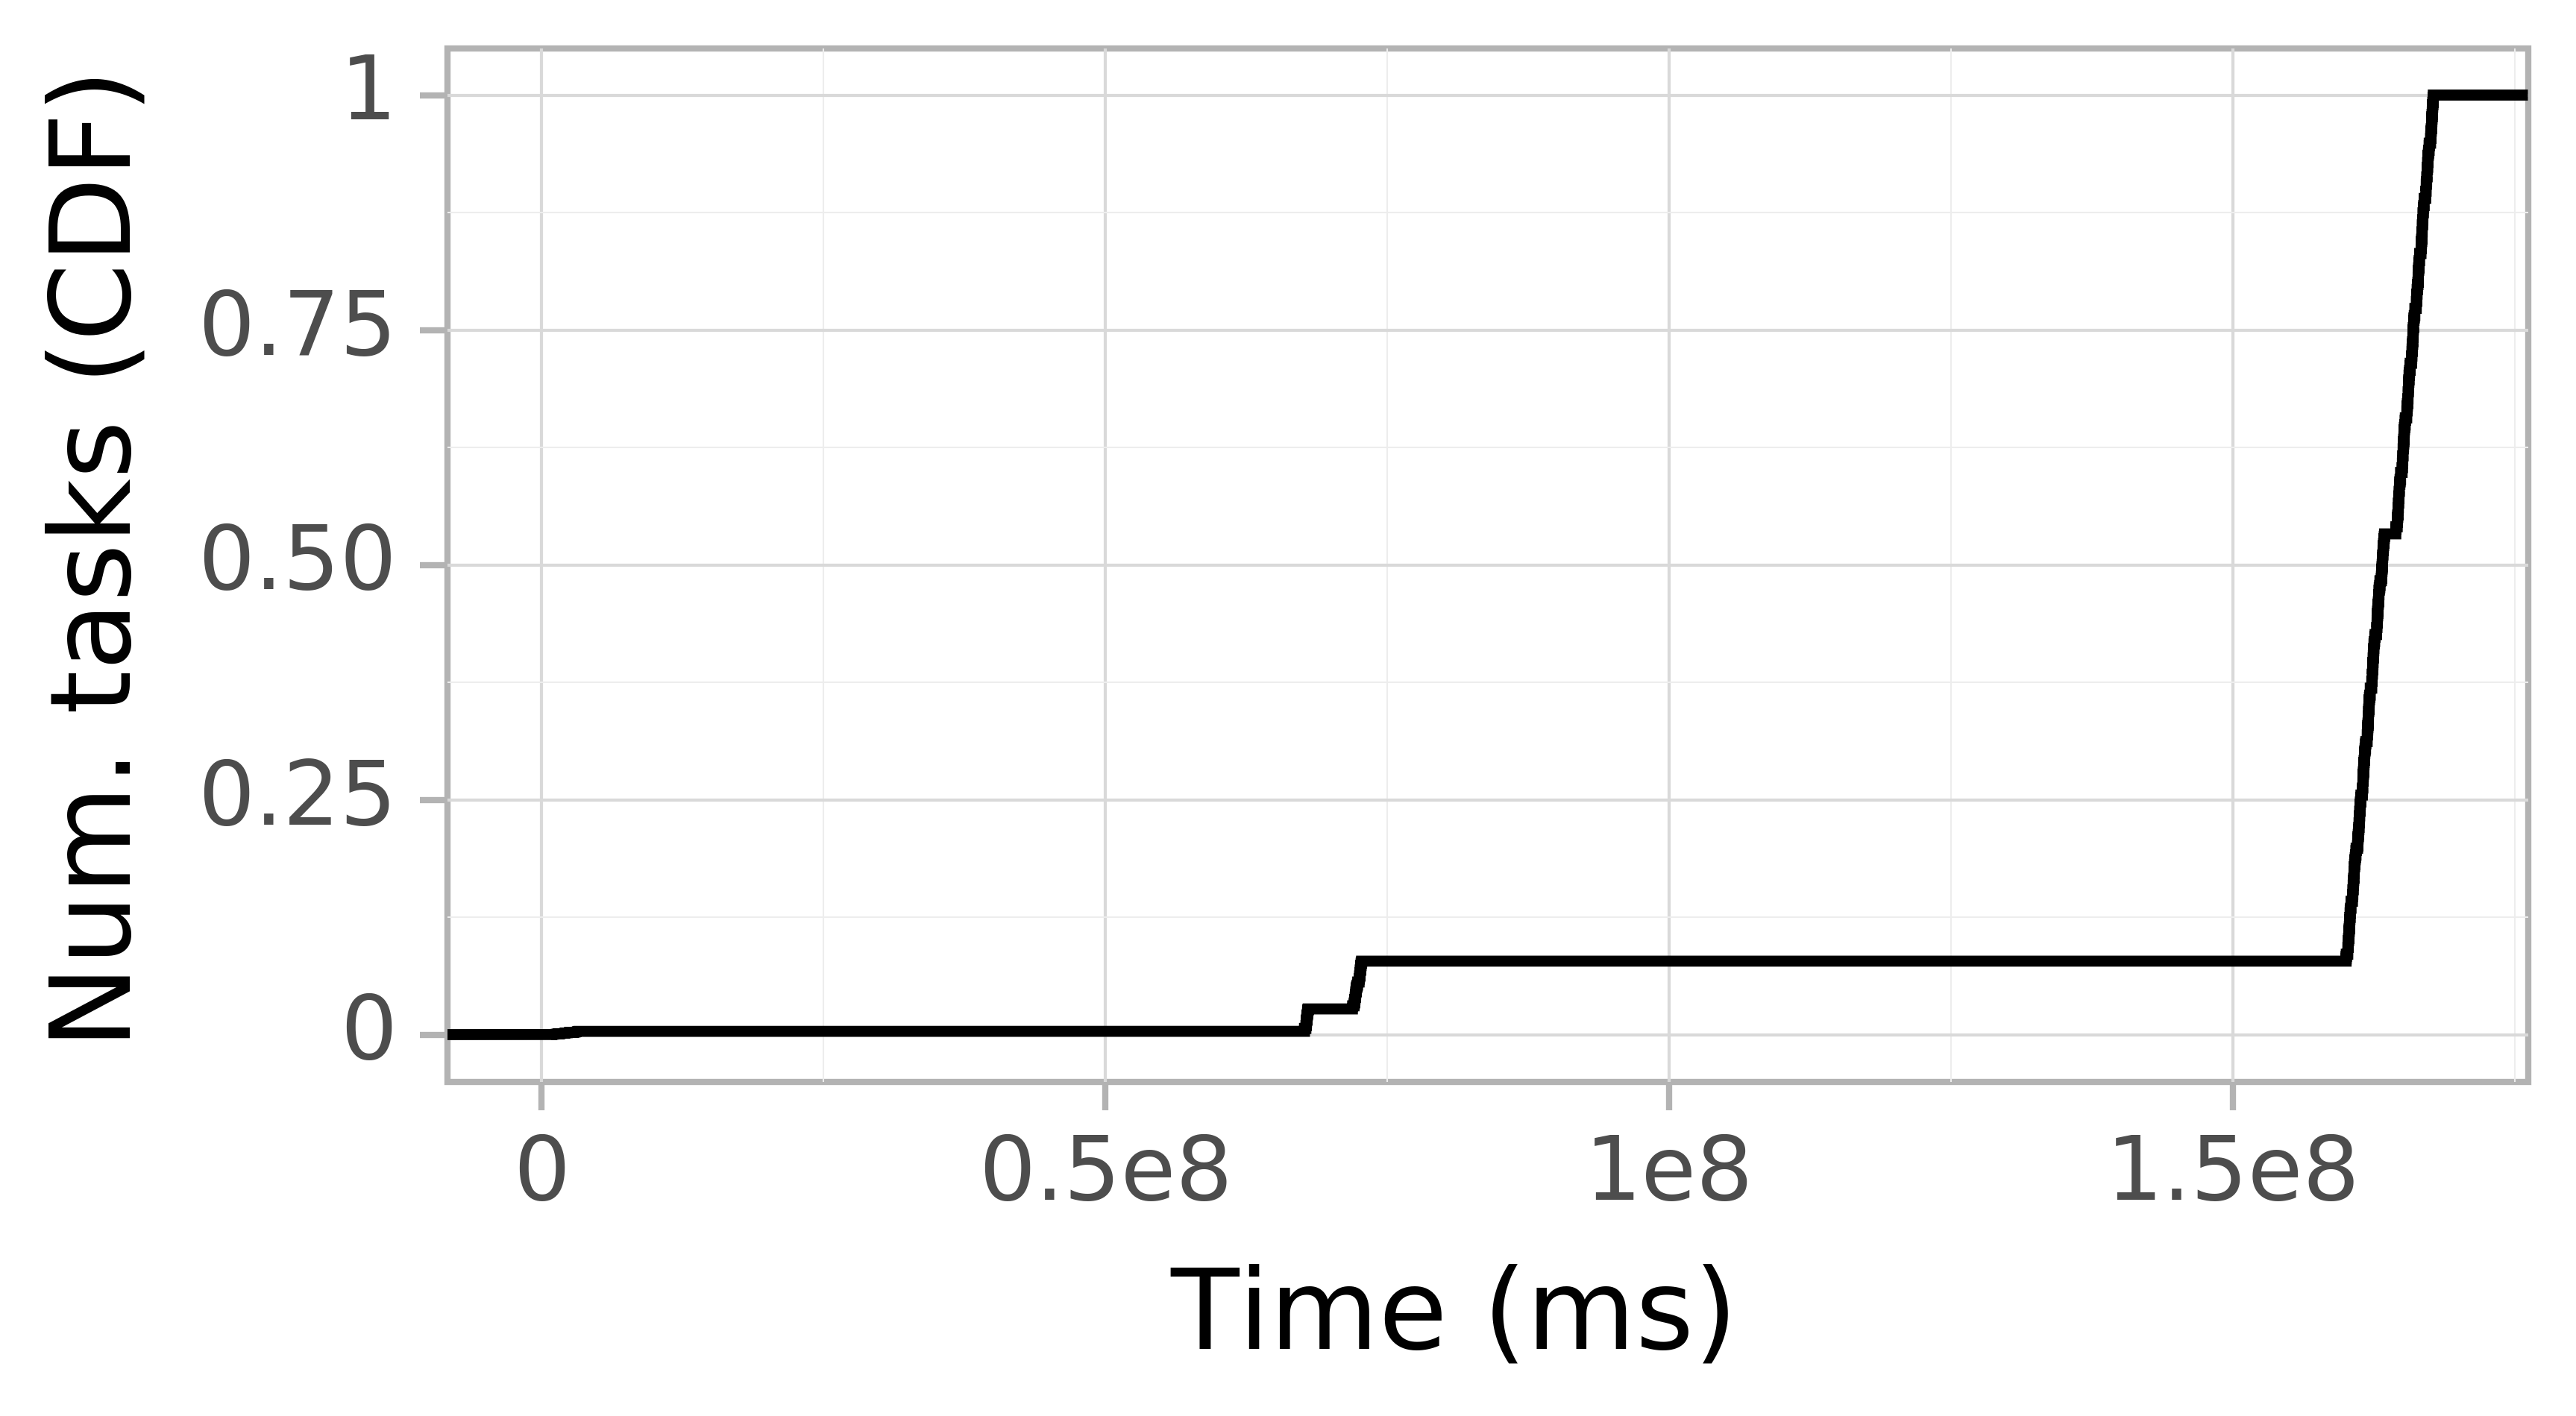 Task arrival CDF graph for the askalon-new_ee27 trace.